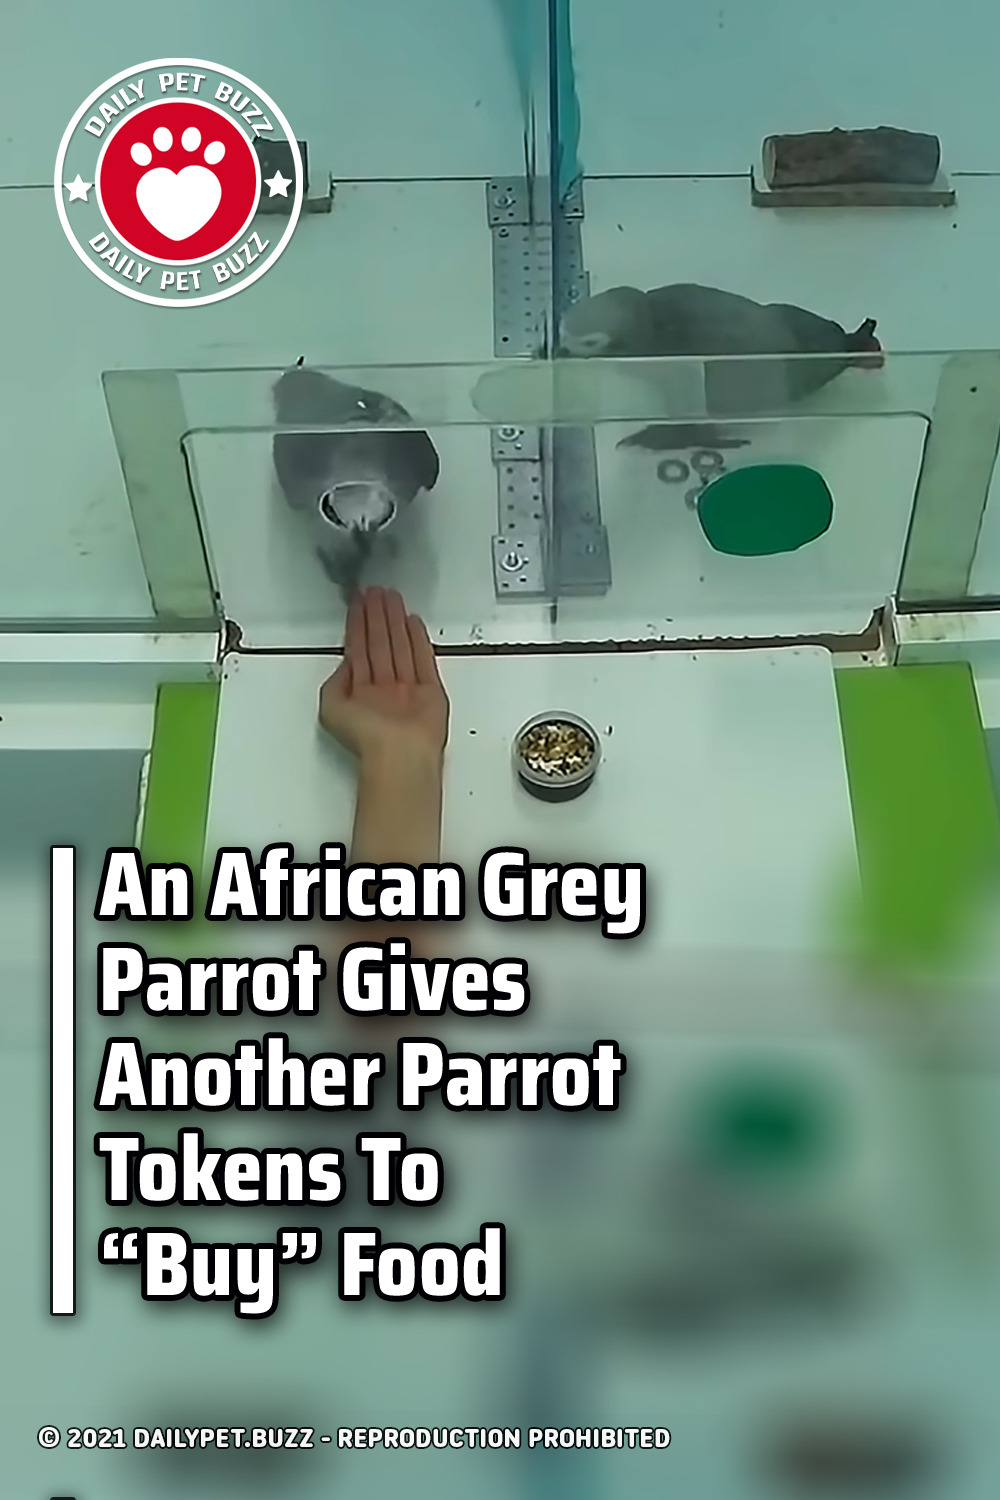 An African Grey Parrot Gives Another Parrot Tokens To “Buy” Food